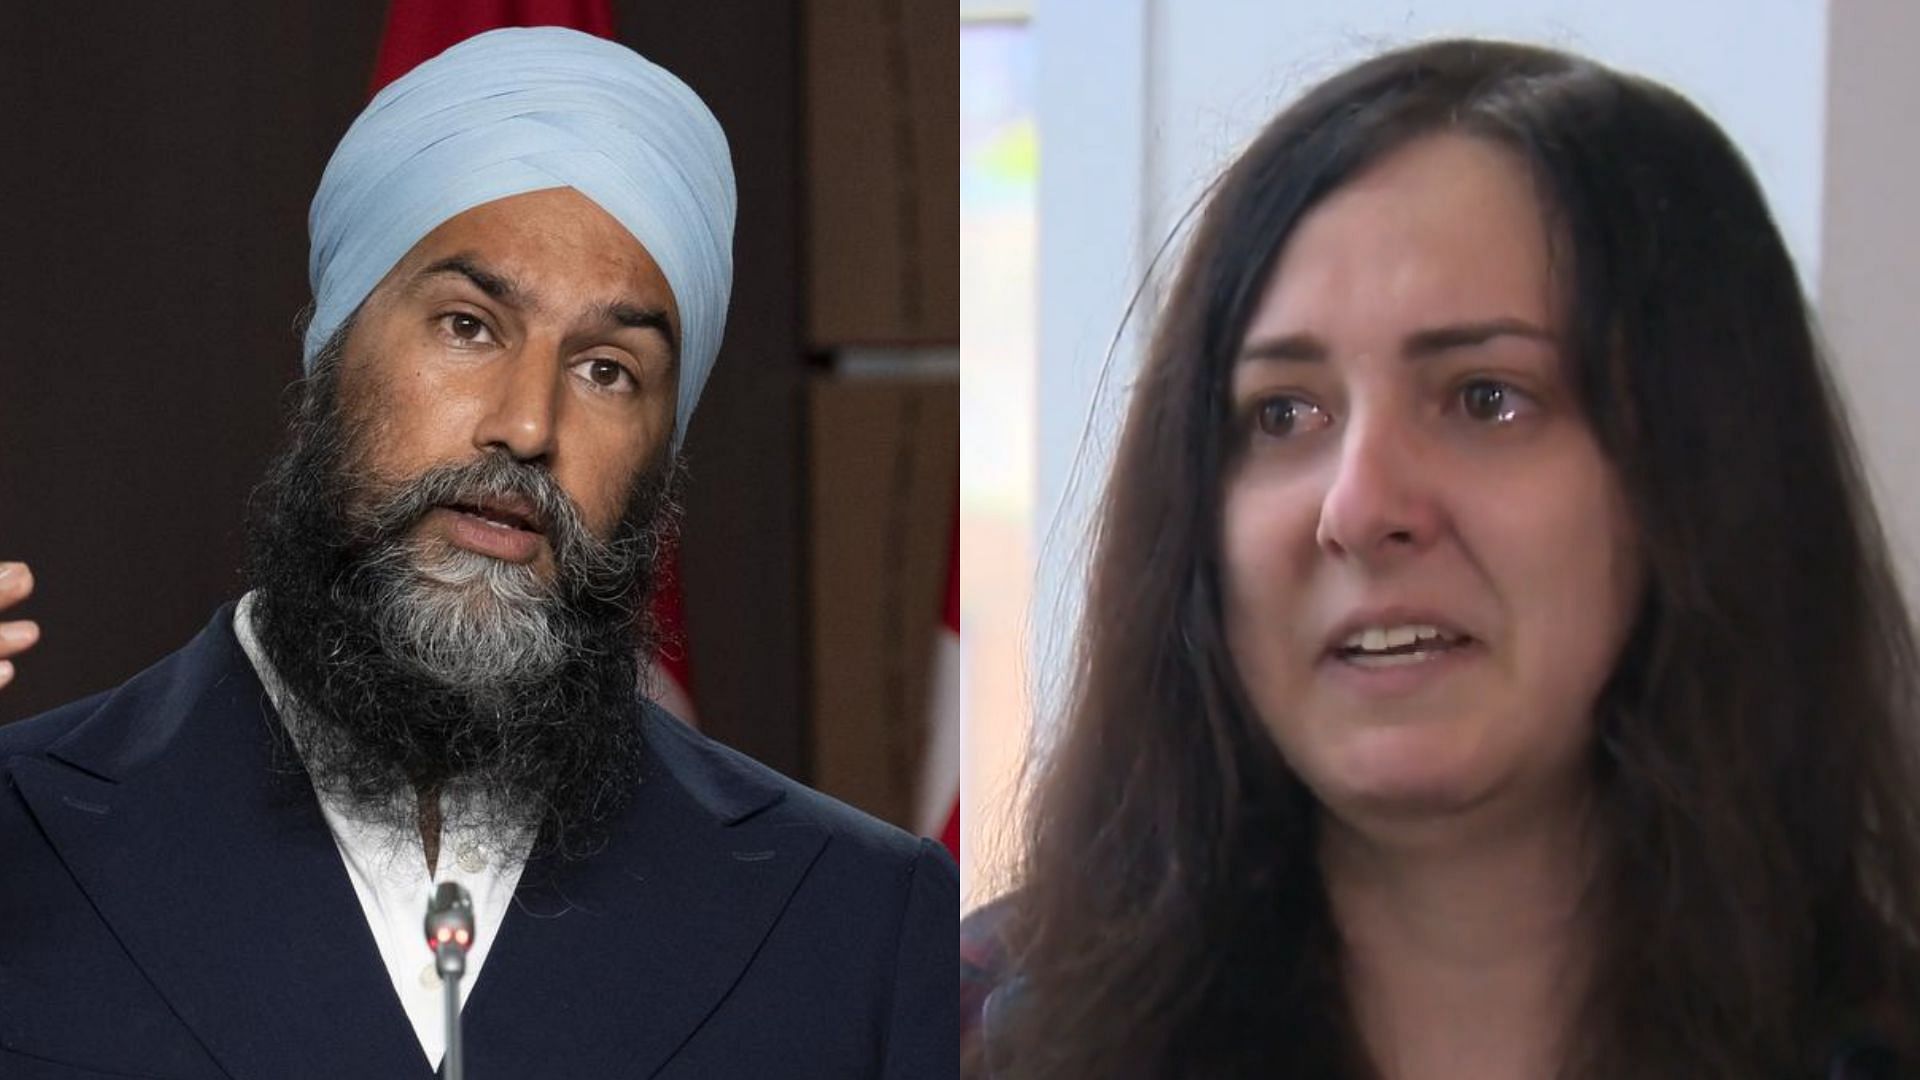 Jagmeet Singh tweets supporting trans streamer Keffals after she got swatted (Image via Toronto Star, Global News)